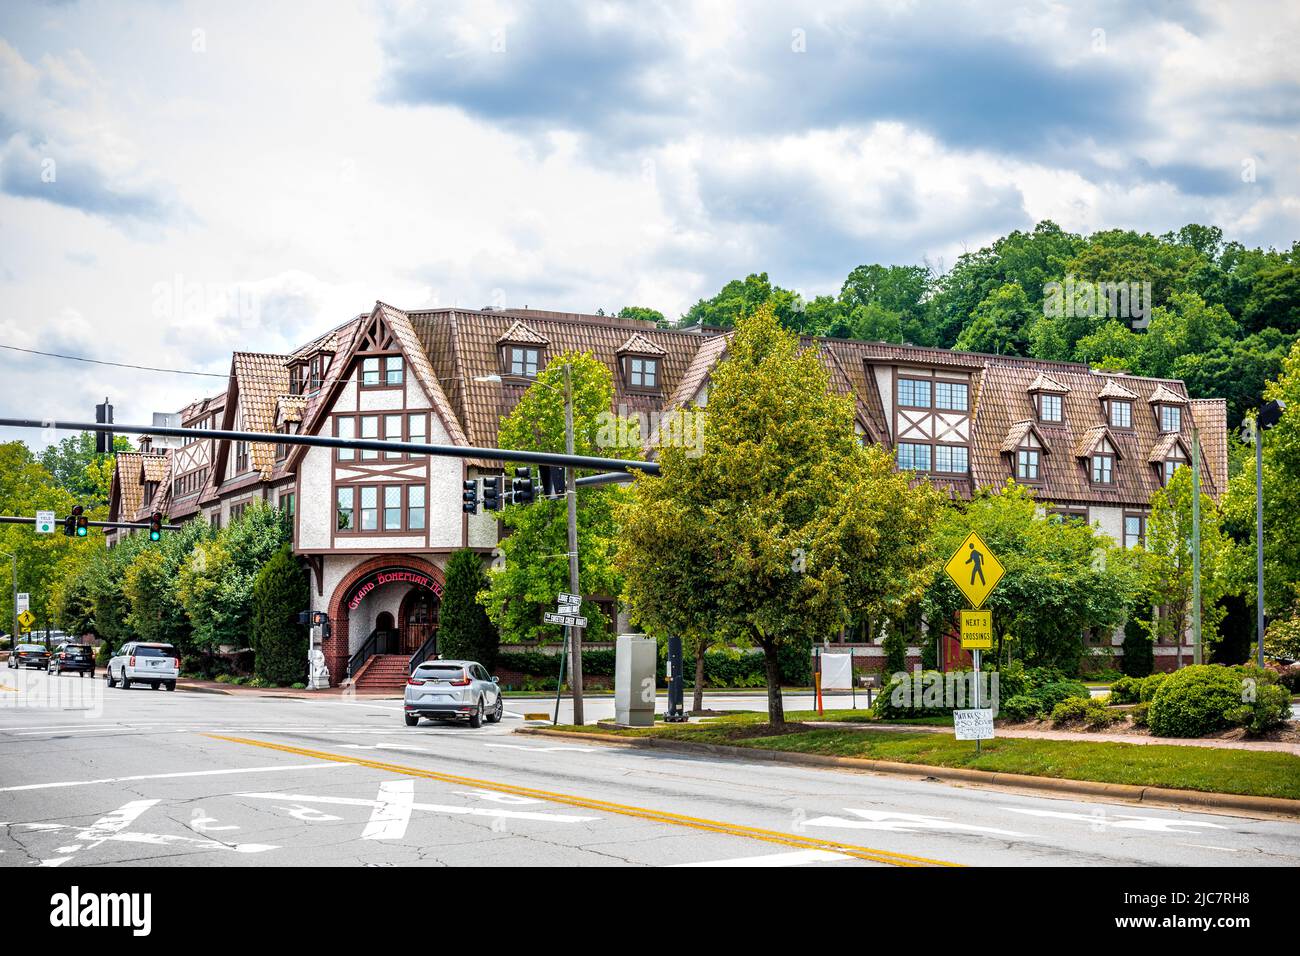 BILTMORE VILLAGE in ASHEVILLE, NC, USA-5 JUNE 2022: Grand Bohemian Hotel, showing entrance and Chalet-style architecture. Stockfoto